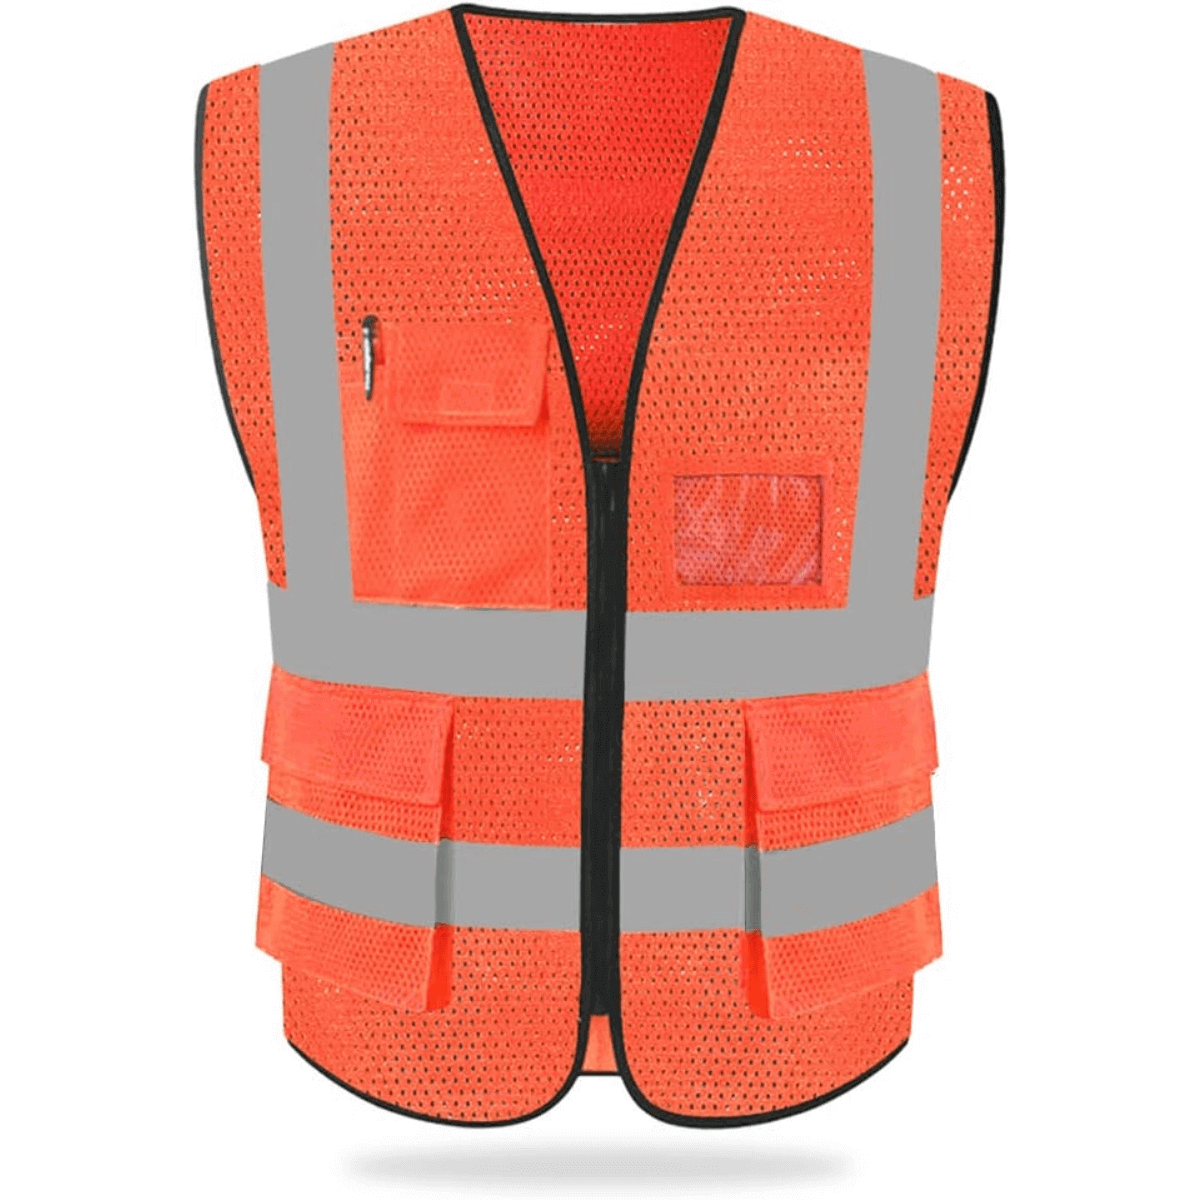 ANSI/ISEA Mesh Reflective Safety Vest with Pockets and Zipper